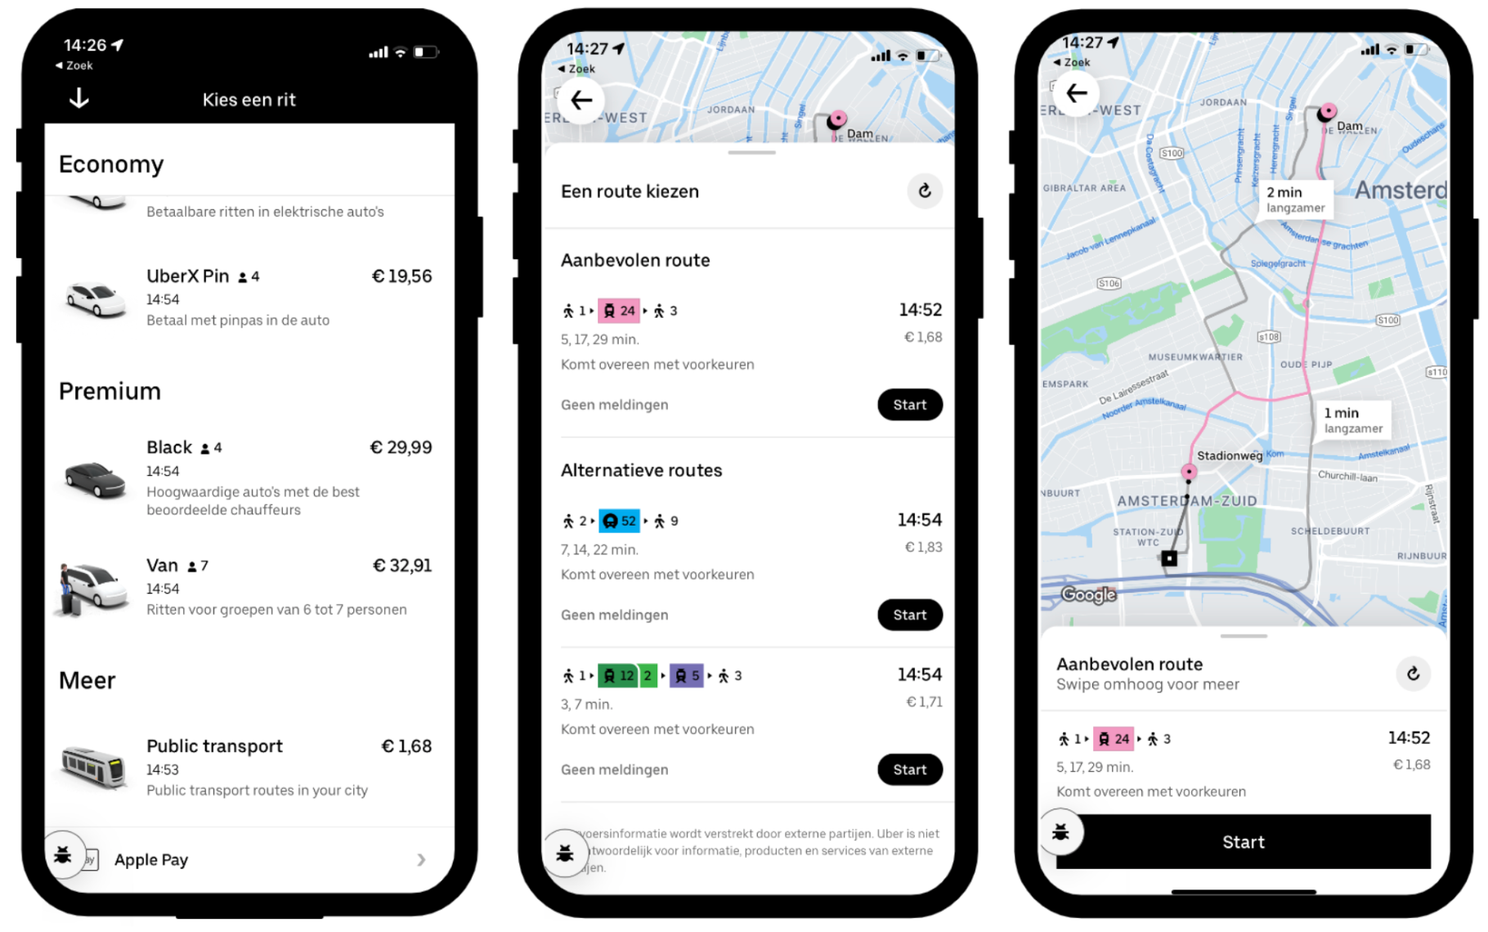 You can now also plan your public transport trip in the Uber app, that's how it works